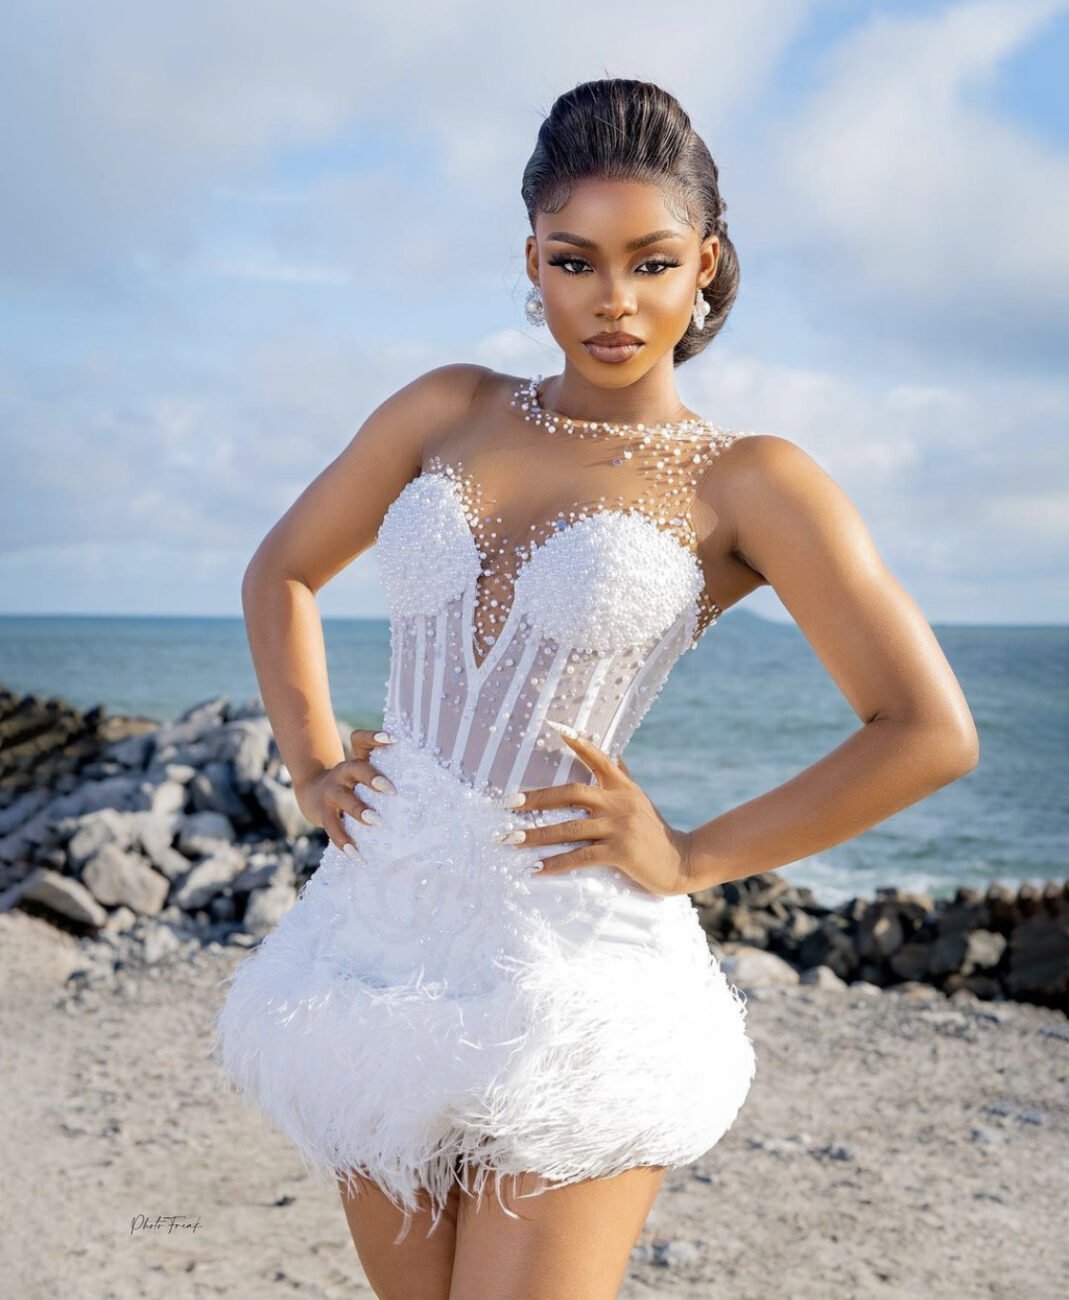 Priscilla Ojo in a white corset dress with beads attached around the top.